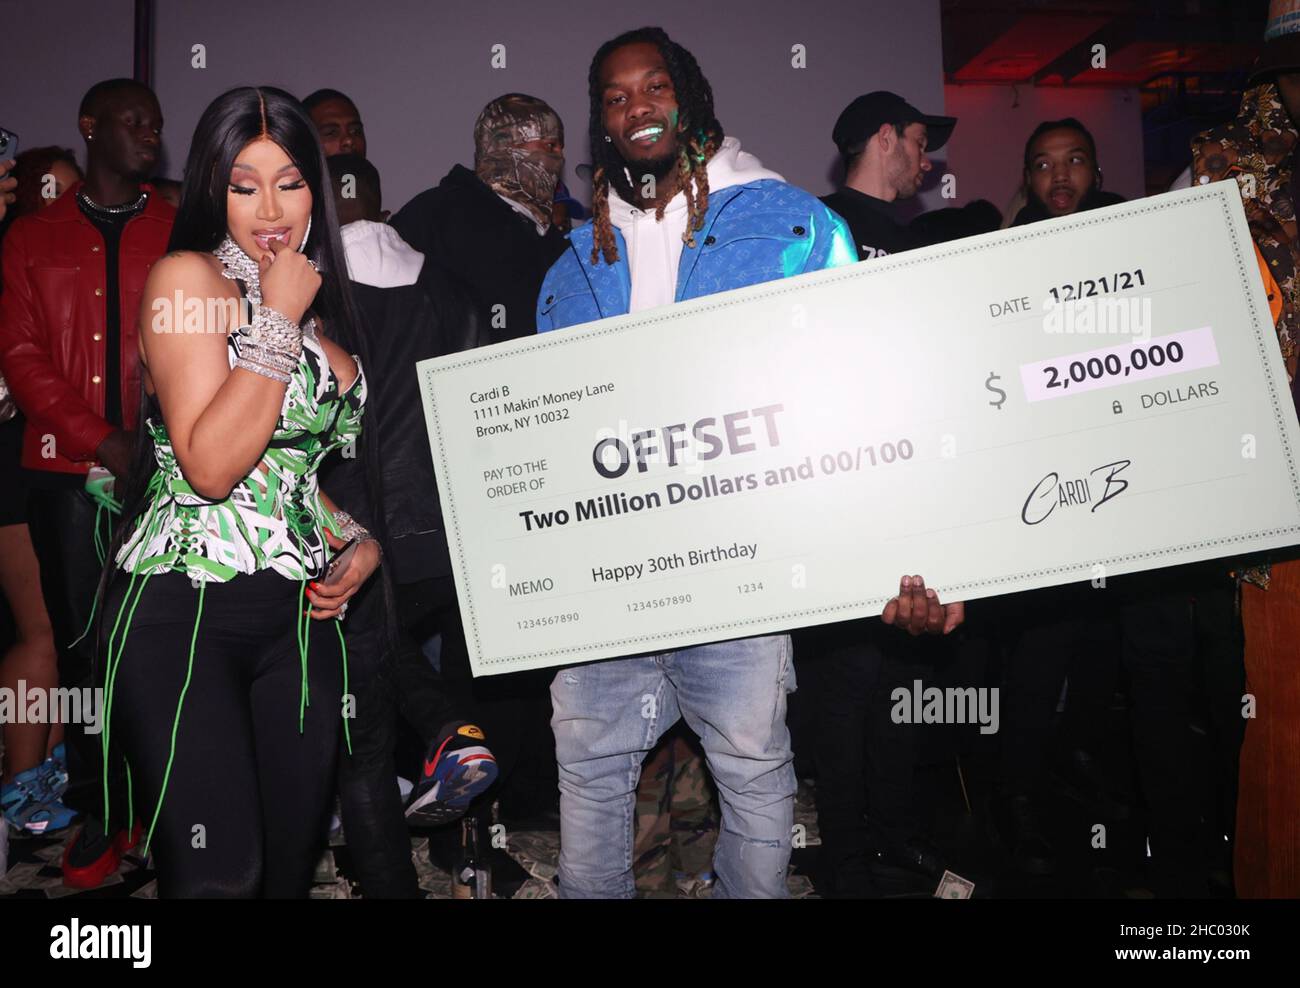 Los Angeles, Ca. 21st Dec, 2021. Cardi B presents Offset with his $2,000,000 gift at his 30th Birthday Party hosted by Cardi B at Sneakertopia LA in Los Angeles, California on December 21, 2021. Credit: Walik Goshorn/Media Punch/Alamy Live News Stock Photo